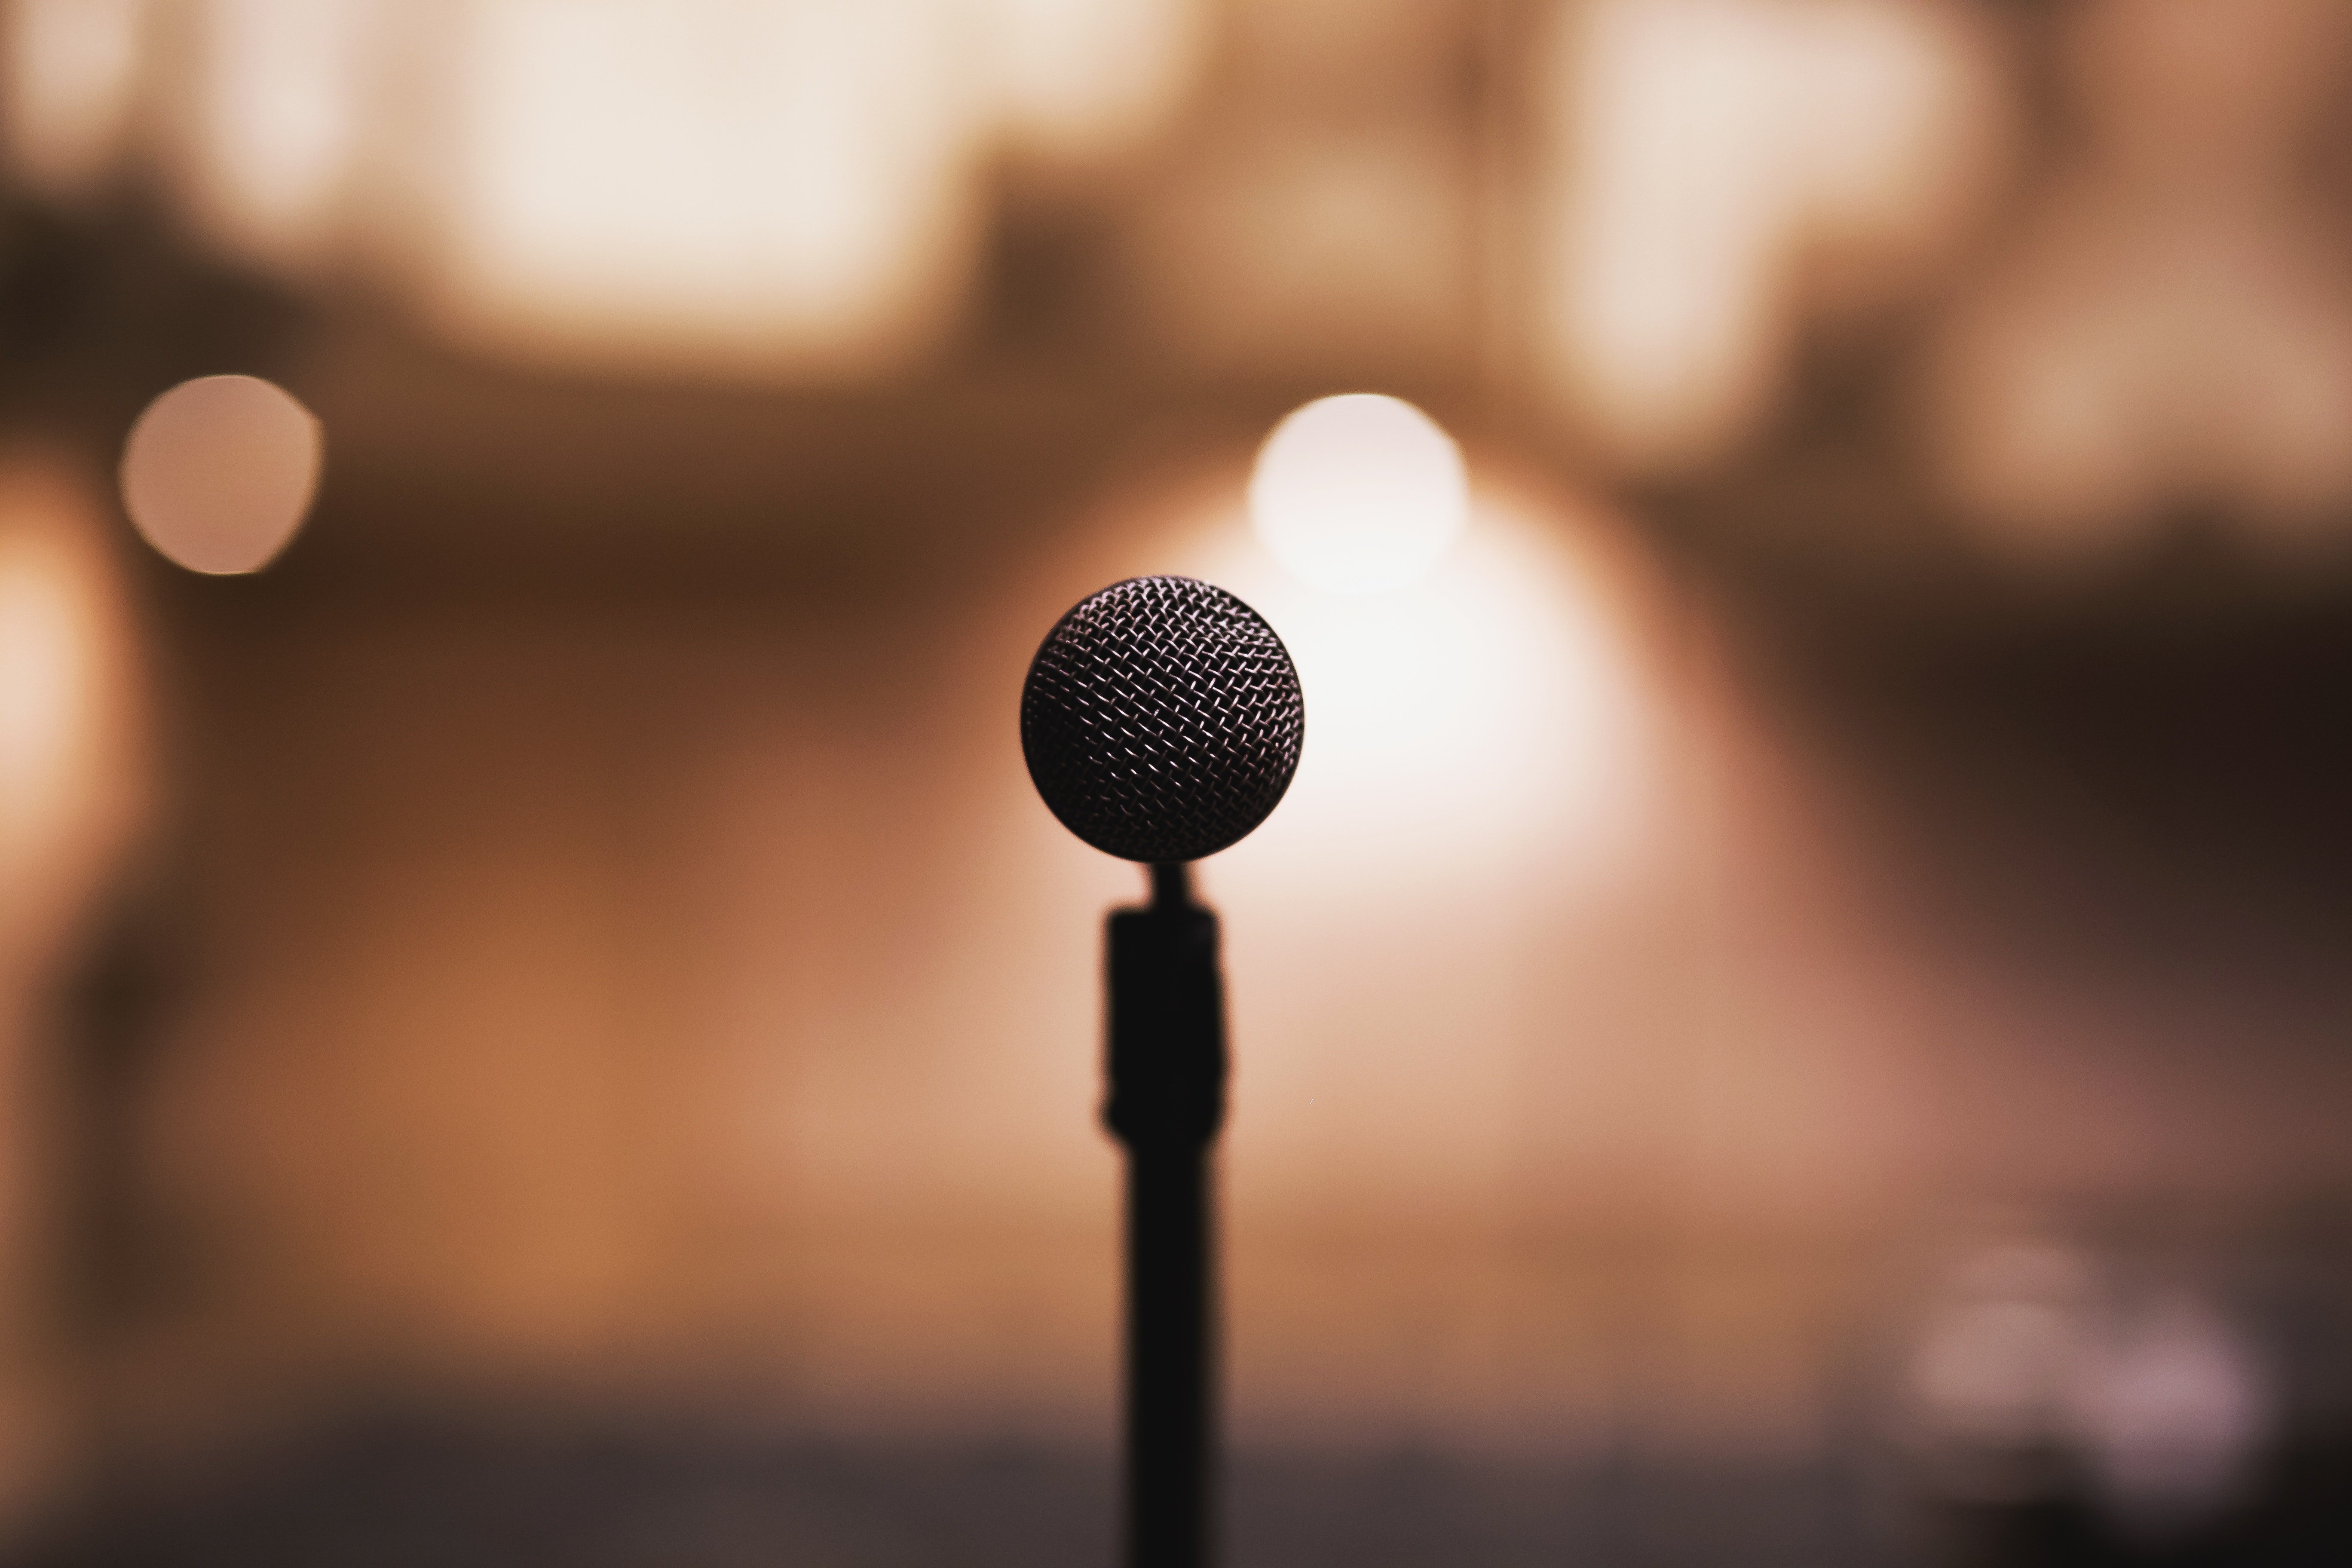 "CBD Oil For Public Speaking Anxiety"